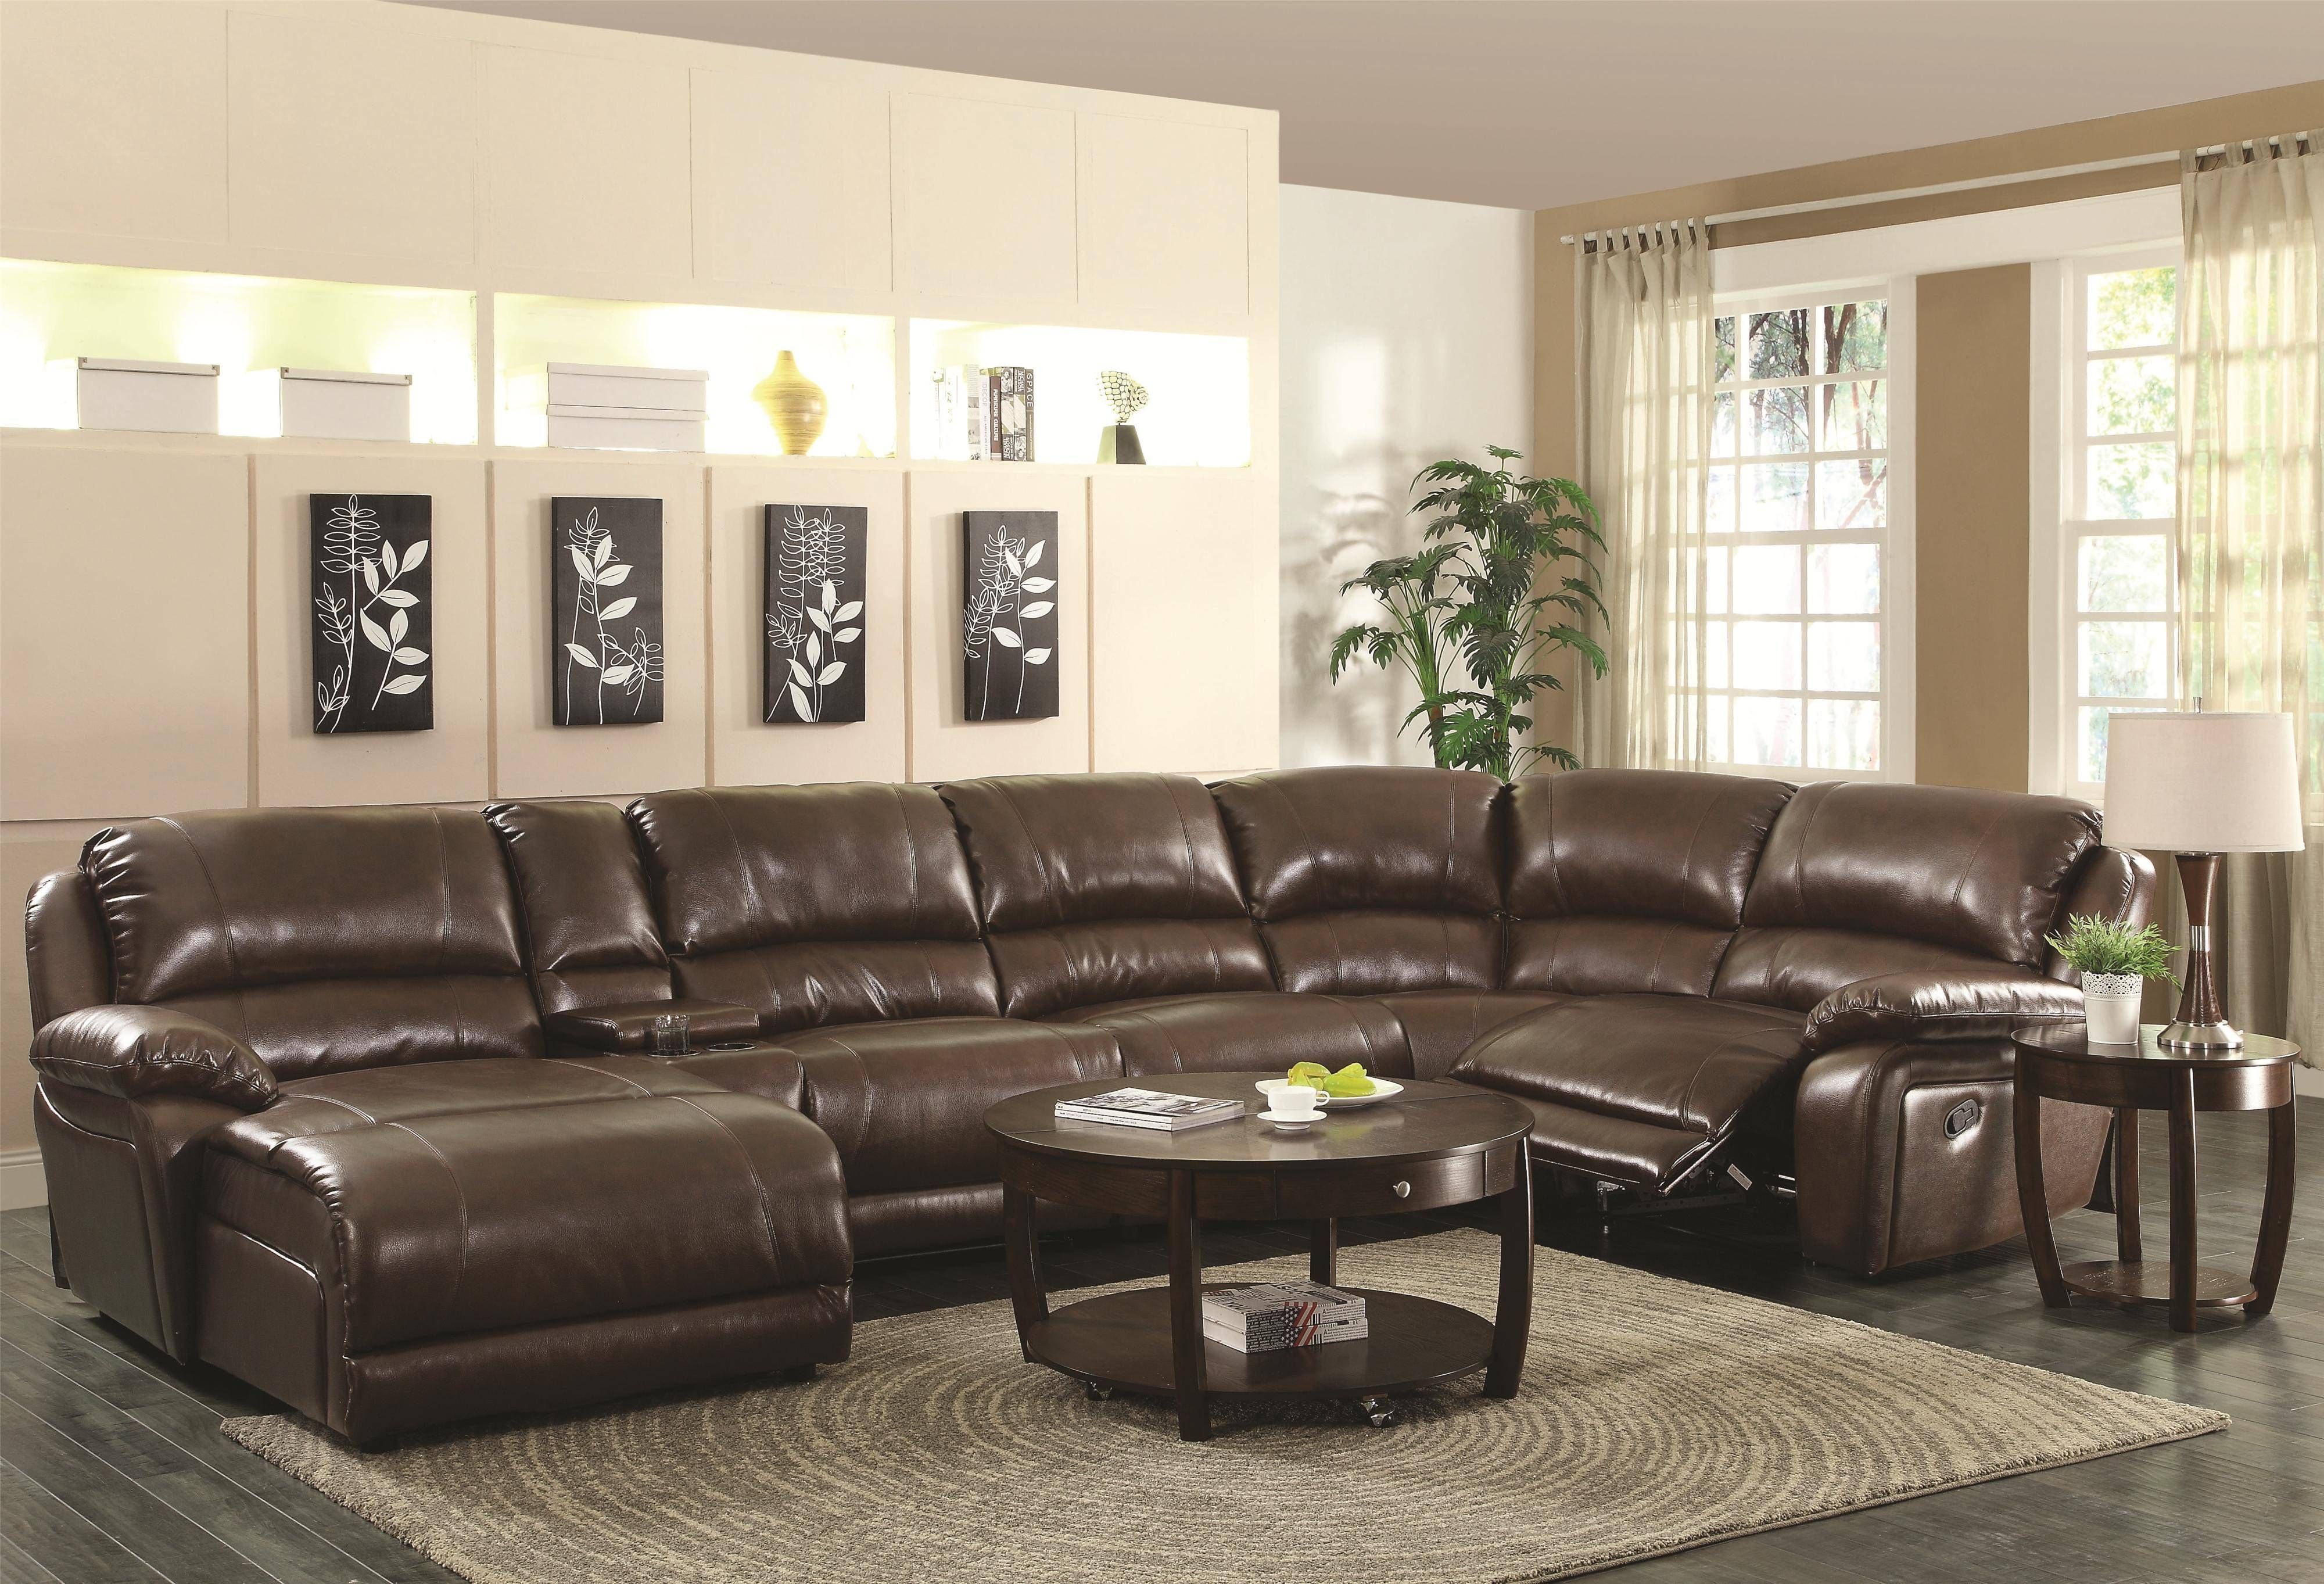 Coaster Mackenzie Chestnut 6 Piece Reclining Sectional Sofa With With Regard To Coaster Sectional Sofas (View 6 of 15)